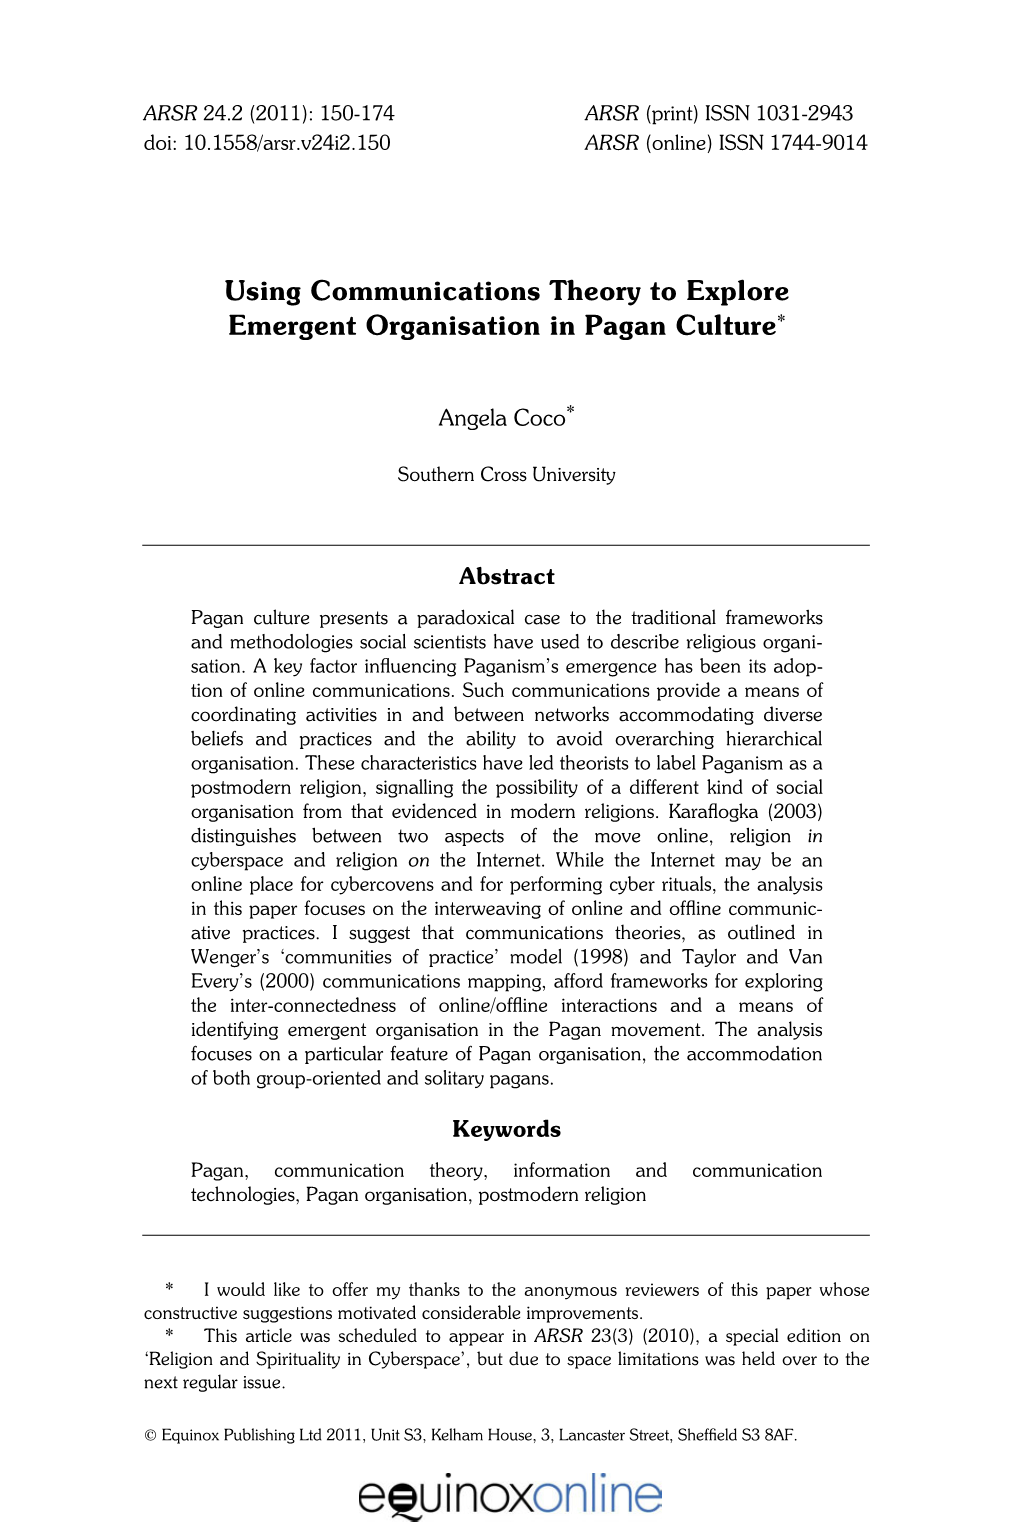 Using Communications Theory to Explore Emergent Organisation in Pagan Culture*